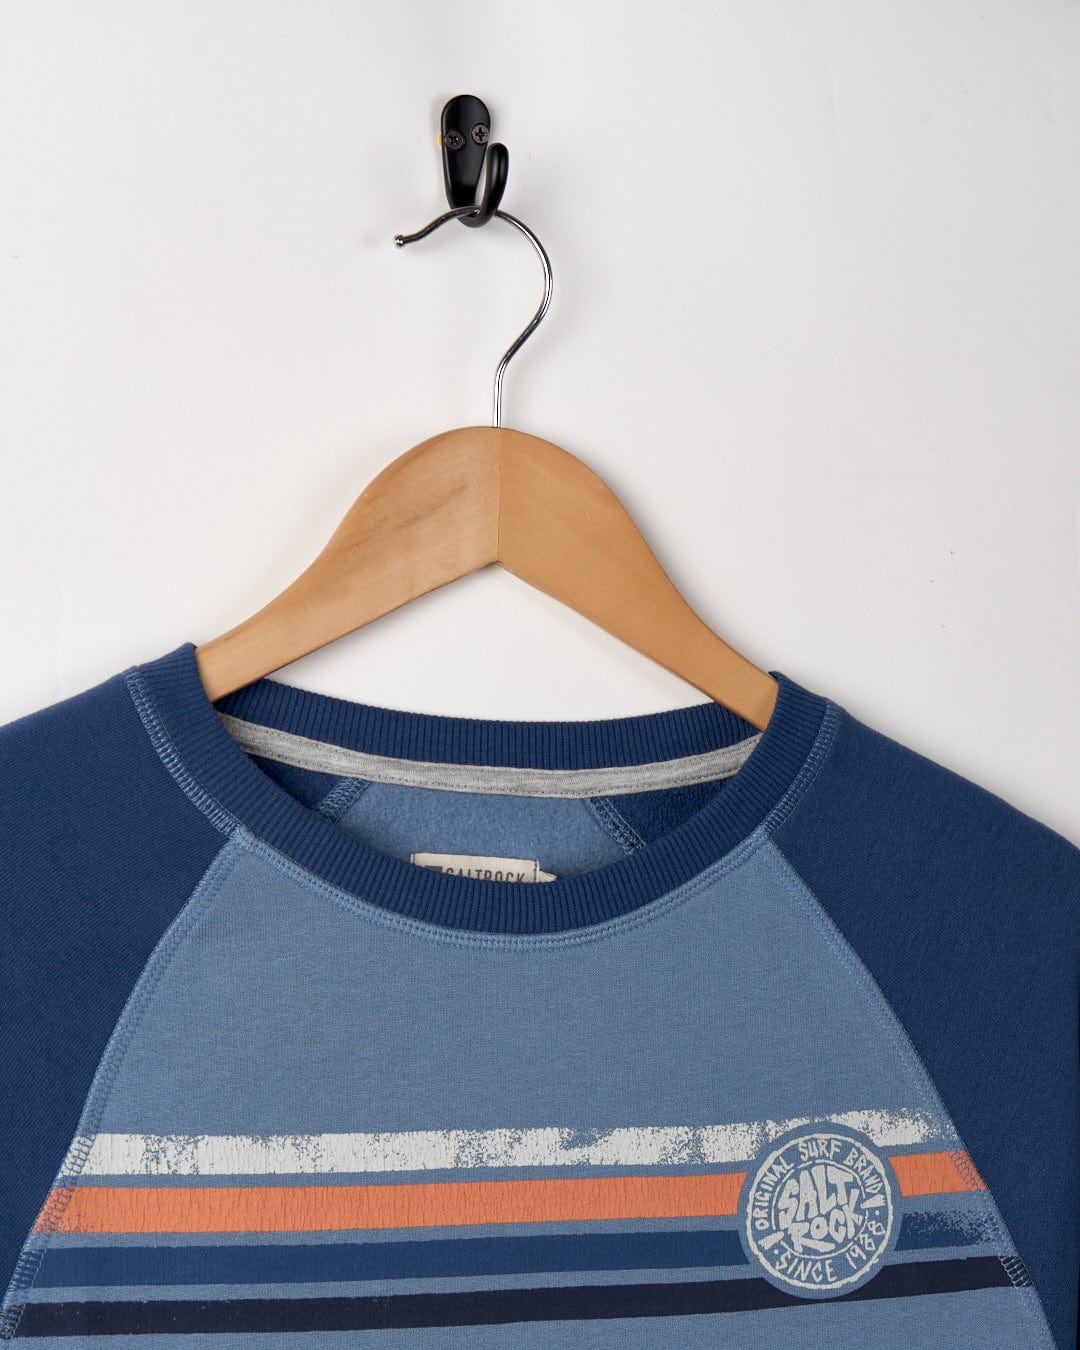 A spray stripe Saltrock blue and gray striped children's sweater with Raglan sleeves hanging on a wooden hanger against a white background.